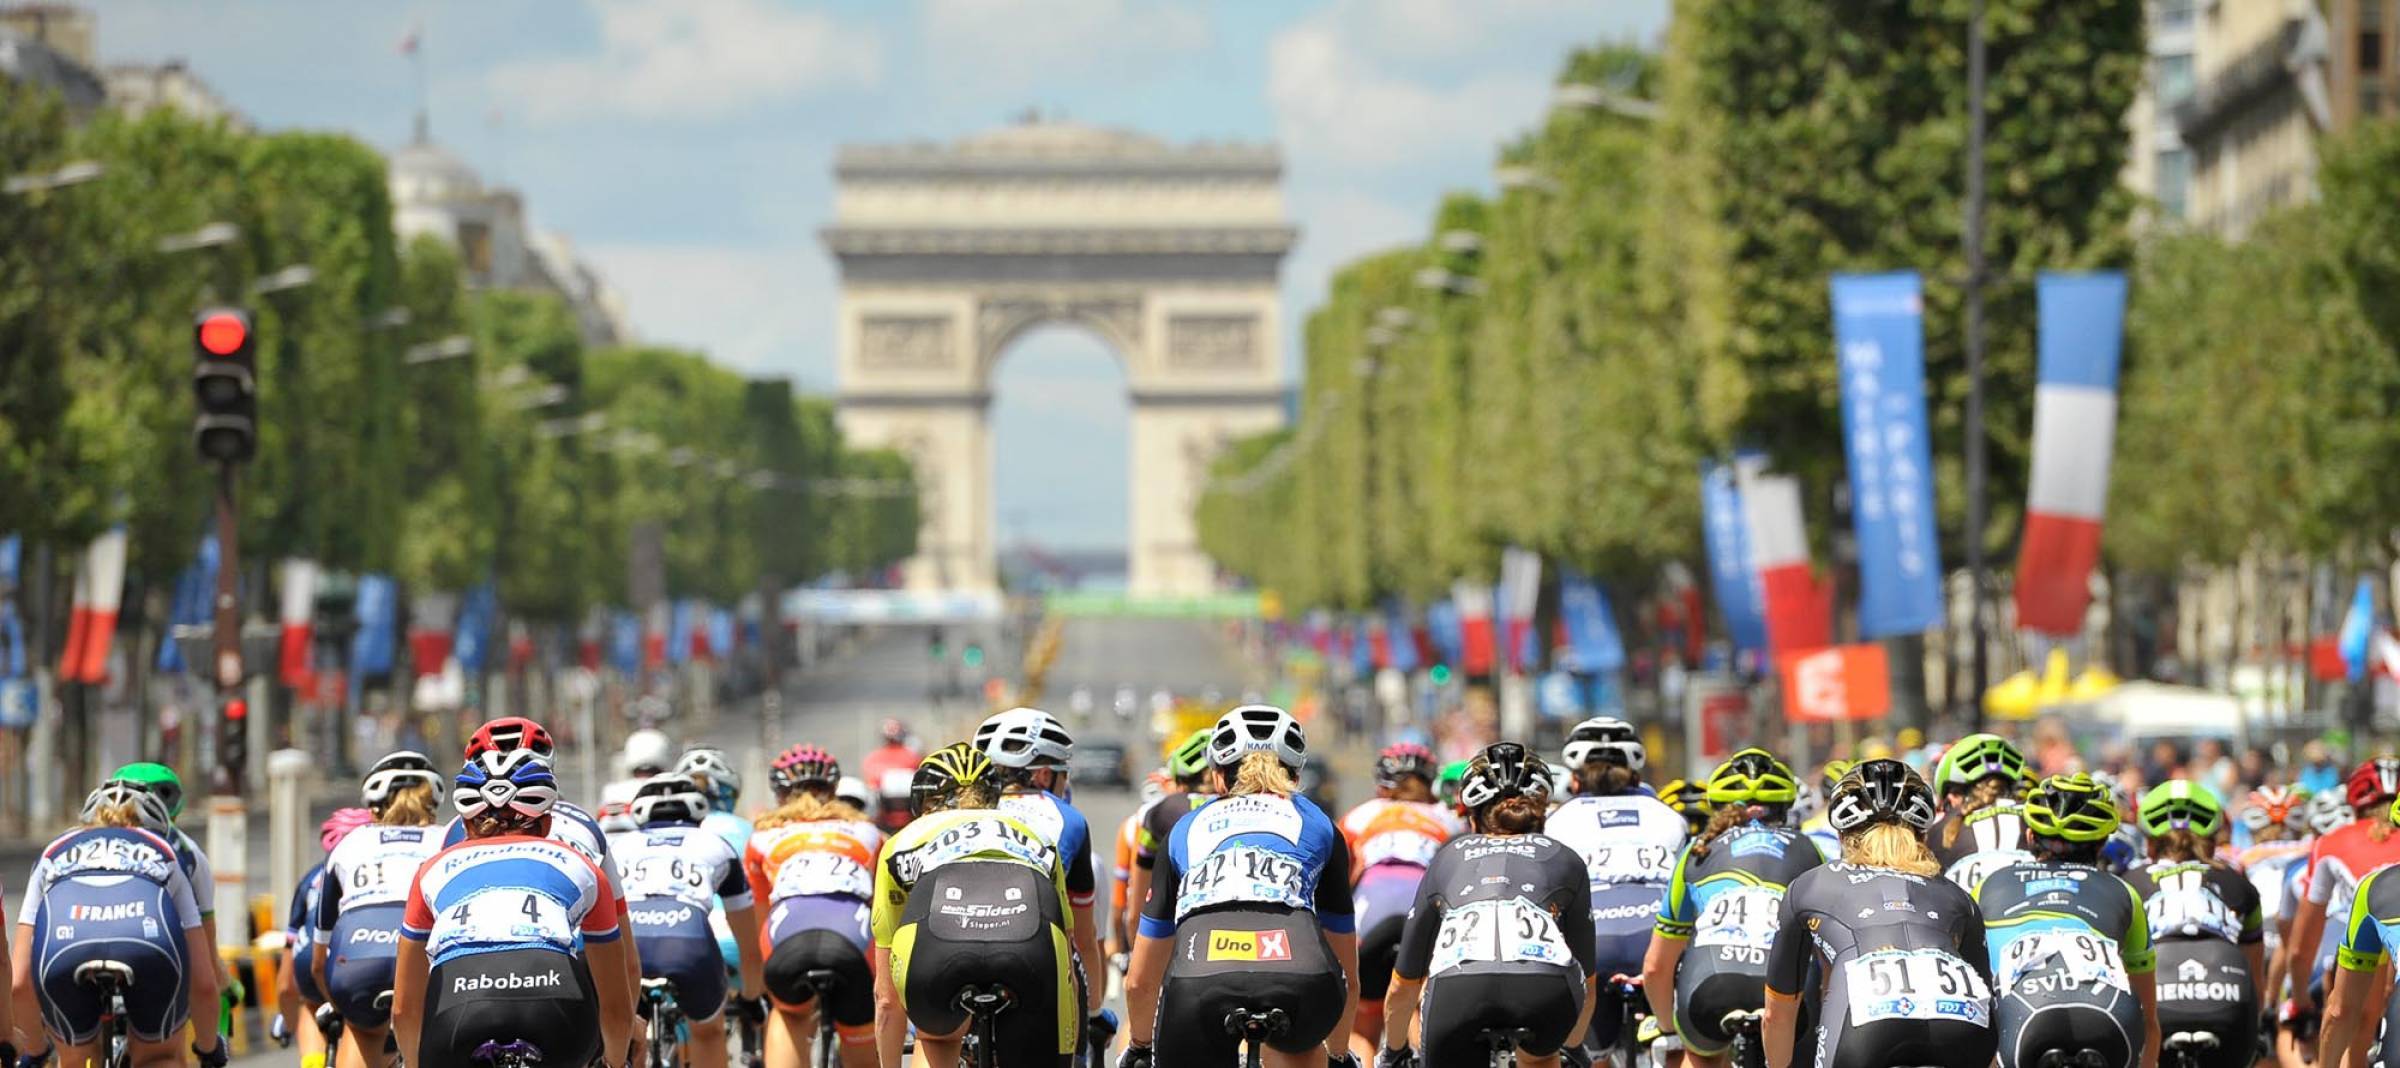 FLOSPORTS AND AMAURY SPORTS ORGANISATION ANNOUNCE PARTNERSHIP RENEWAL FOR EXCLUSIVE CANADIAN BROADCAST RIGHTS TO THE TOUR DE FRANCE